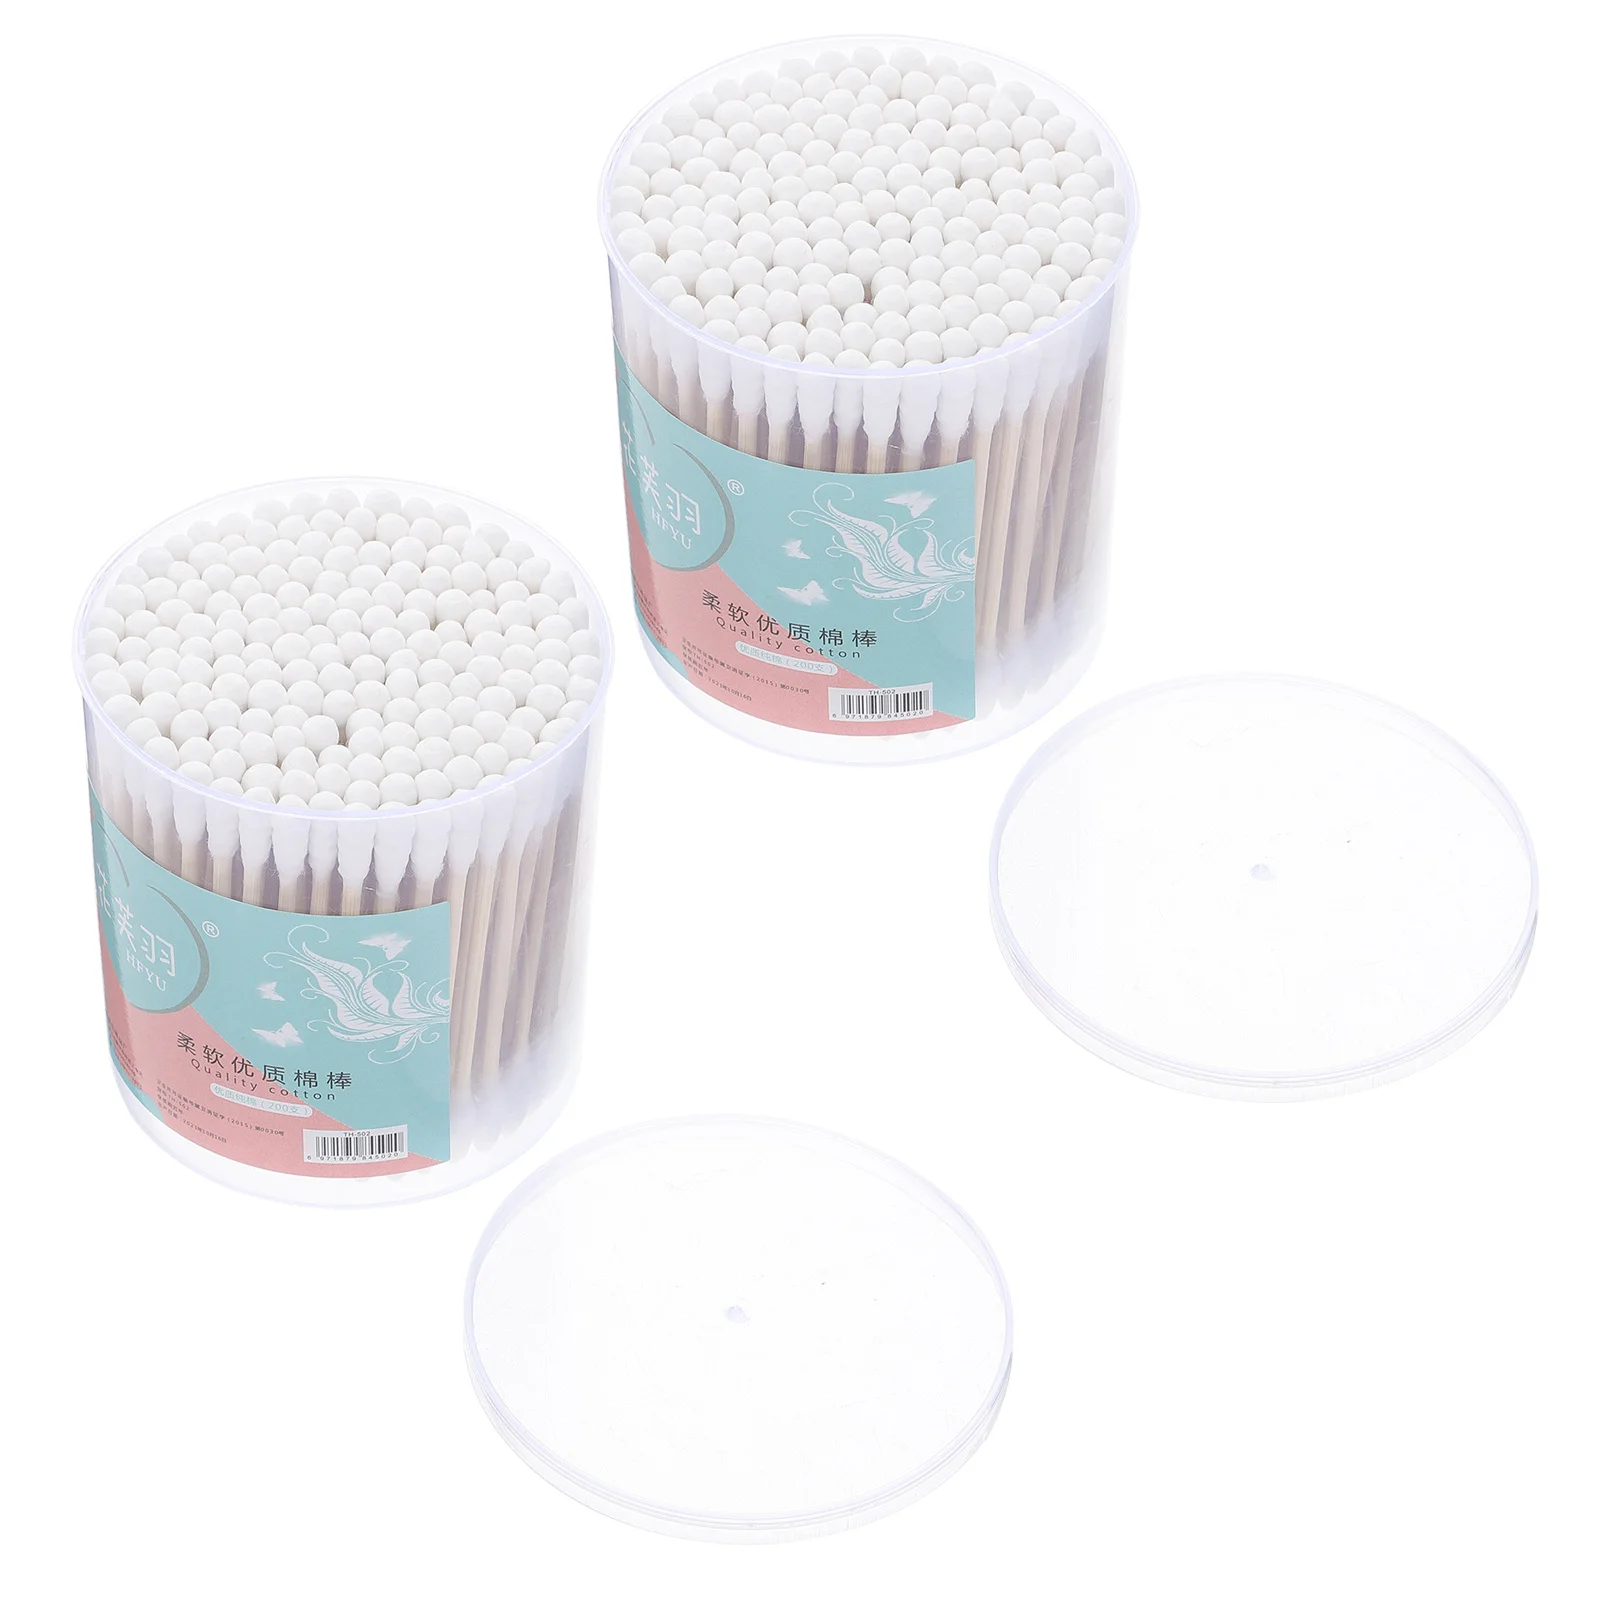 Baby Cotton Swabs 2 Box 400Pcs Baby Safety Swabs Double Spiral Tips Cotton Swabs Paper Sticks Natural Cotton Buds Ear baby cotton swabs 2 box 400pcs baby safety swabs double spiral tips cotton swabs paper sticks natural cotton buds ear